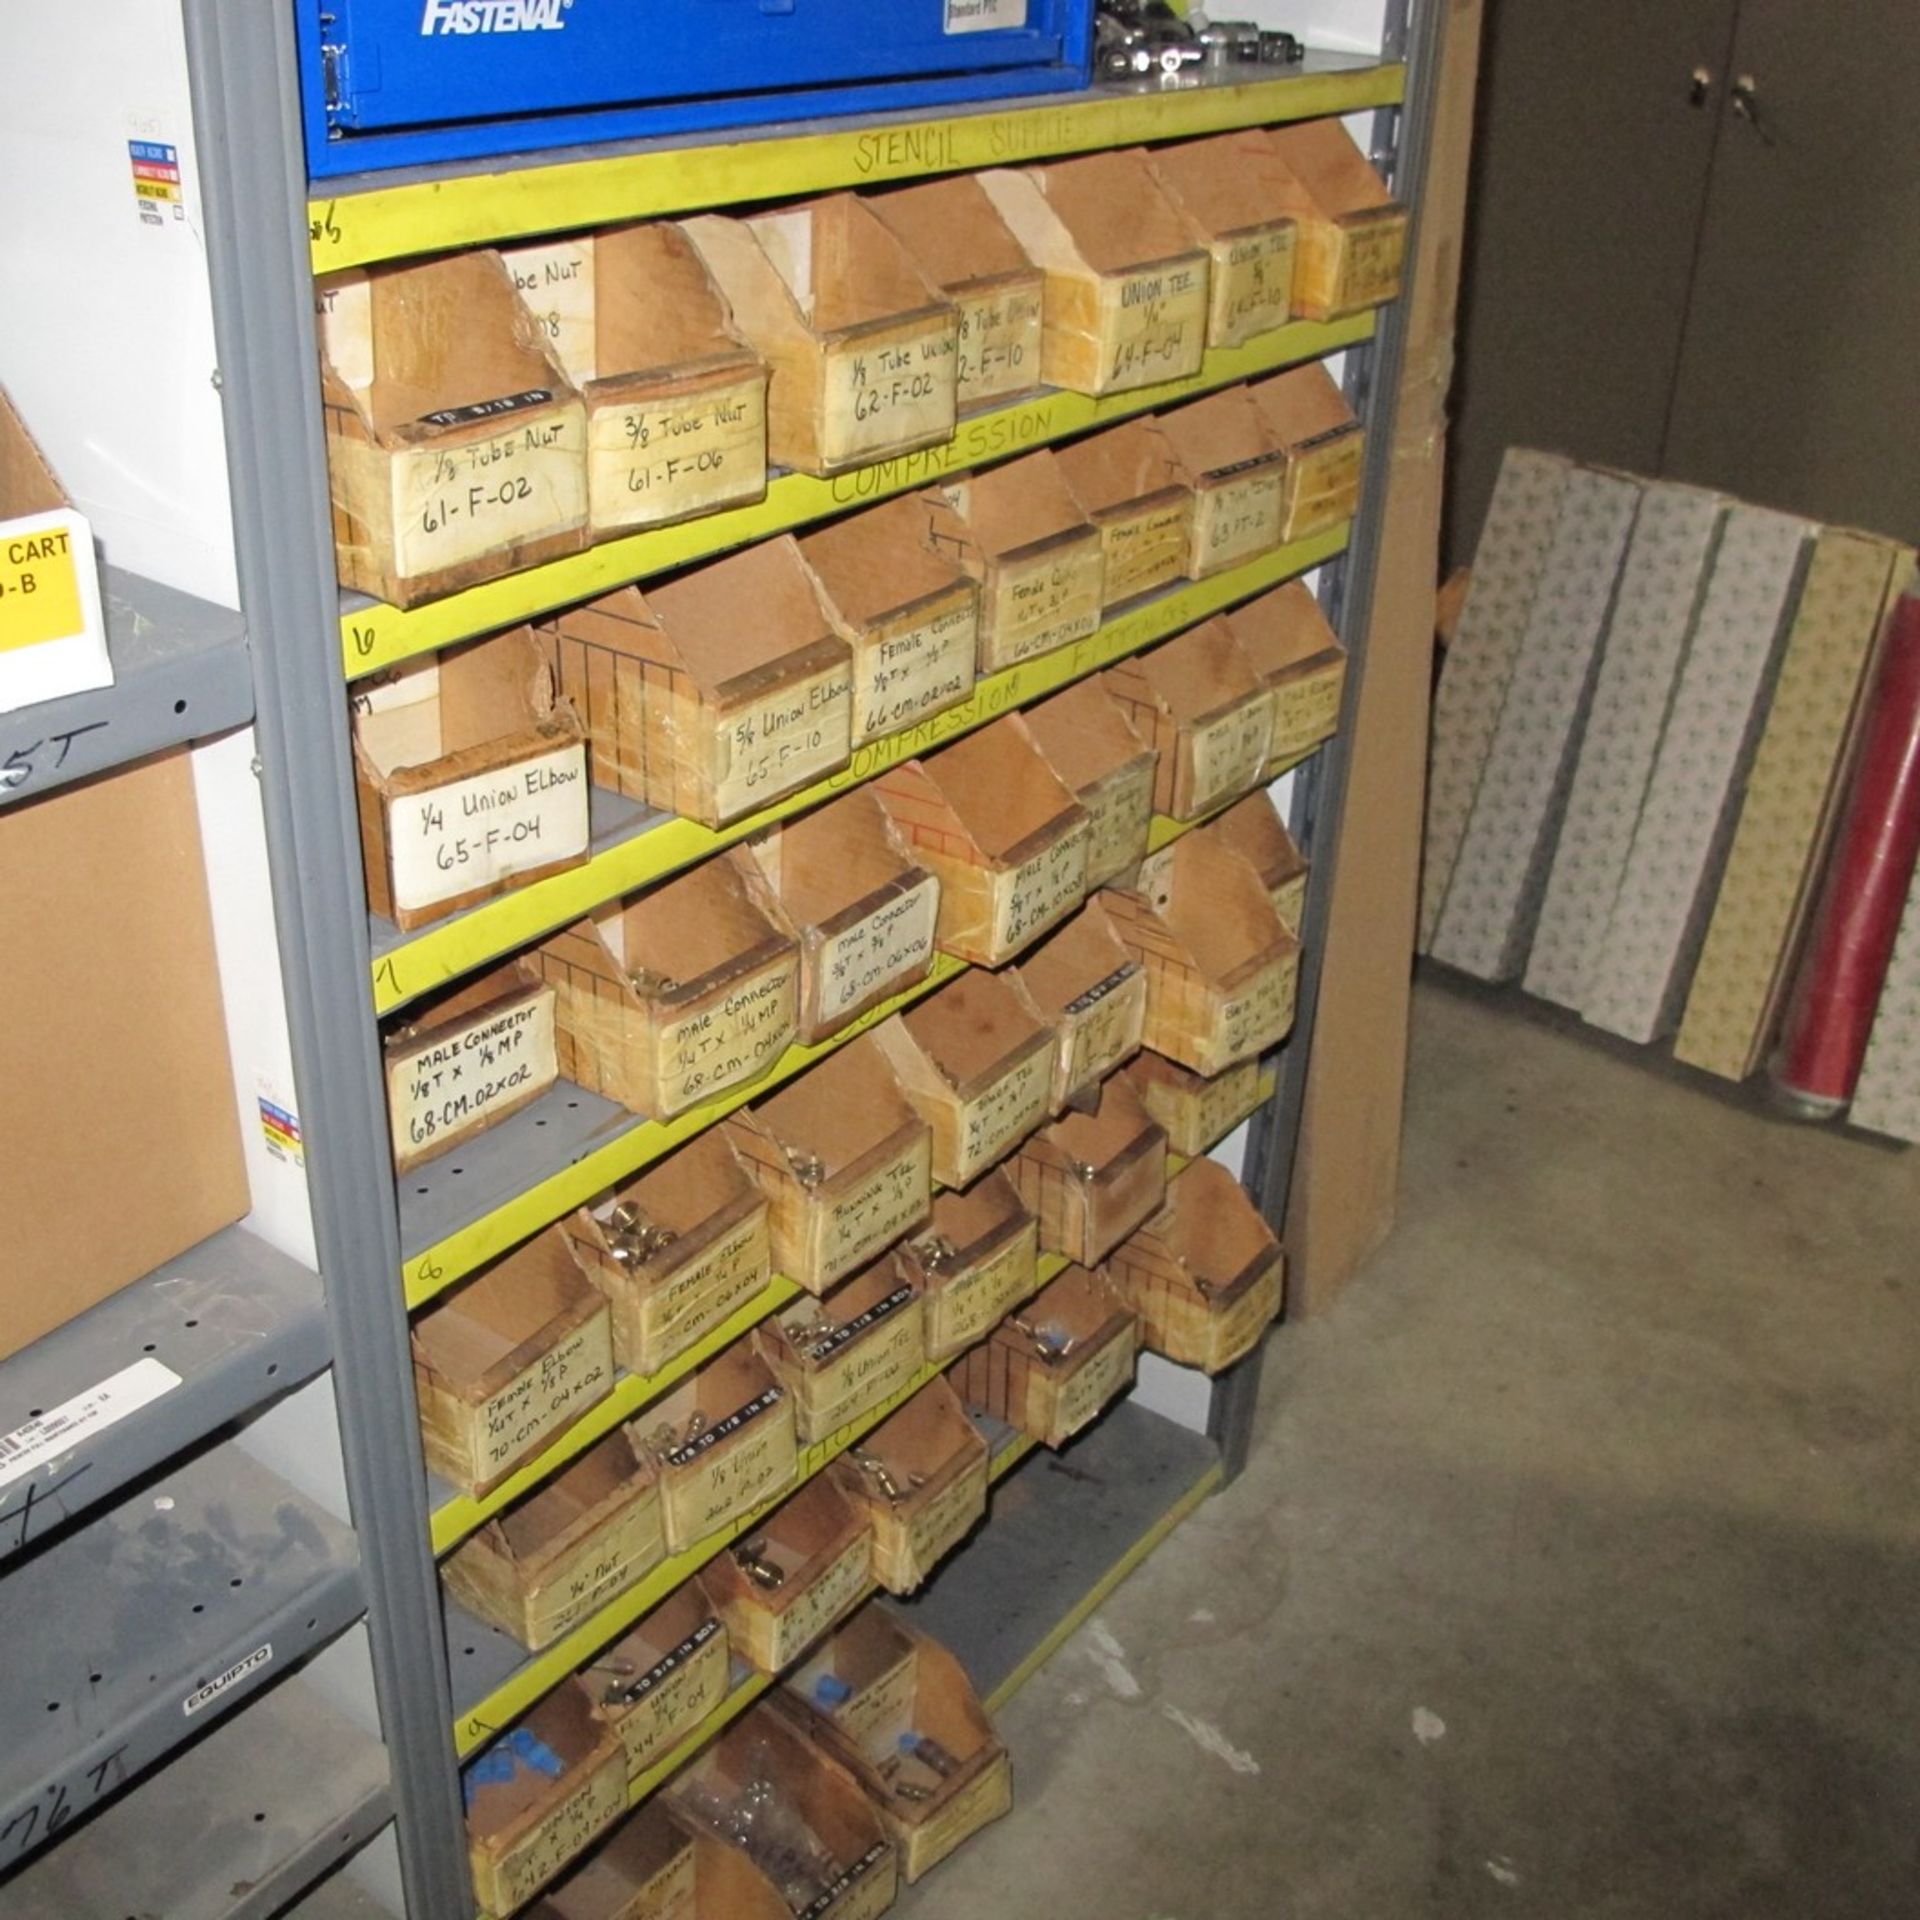 LOT OF ASST. FASTENERS, PARTS CABINETS, SHIM STOCK, SPRINGS, TURN BUCKLE HOOKS, MARKHAM IMAGE - Image 26 of 26